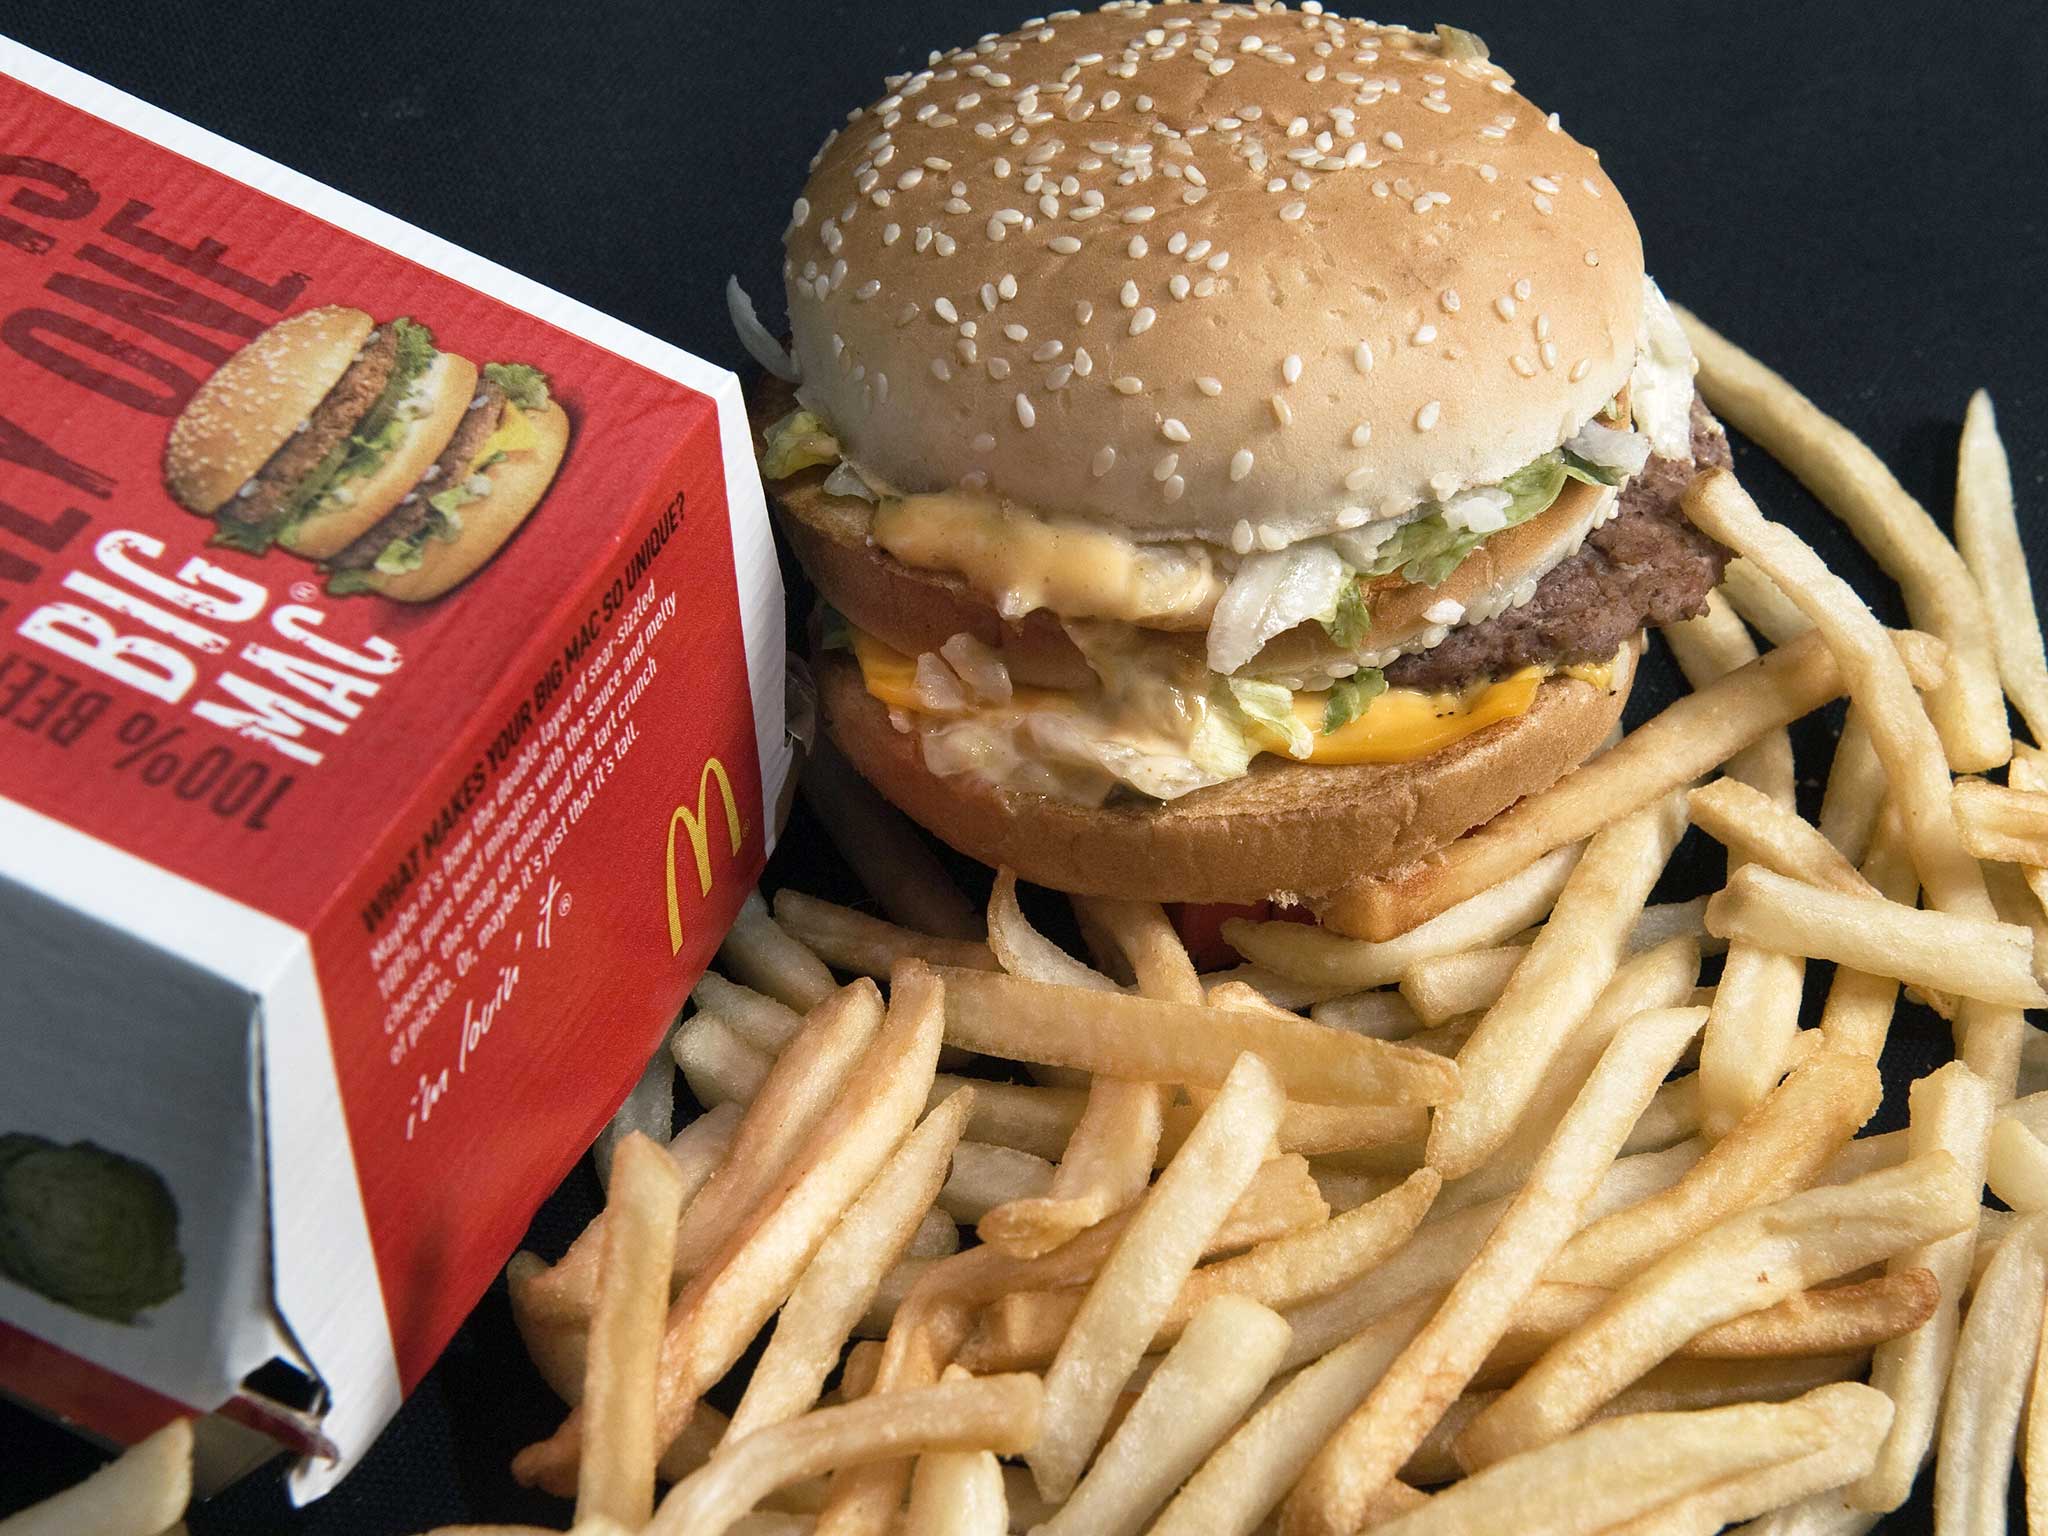 Here's How To Get A Big Mac And Fries For Just £1.99